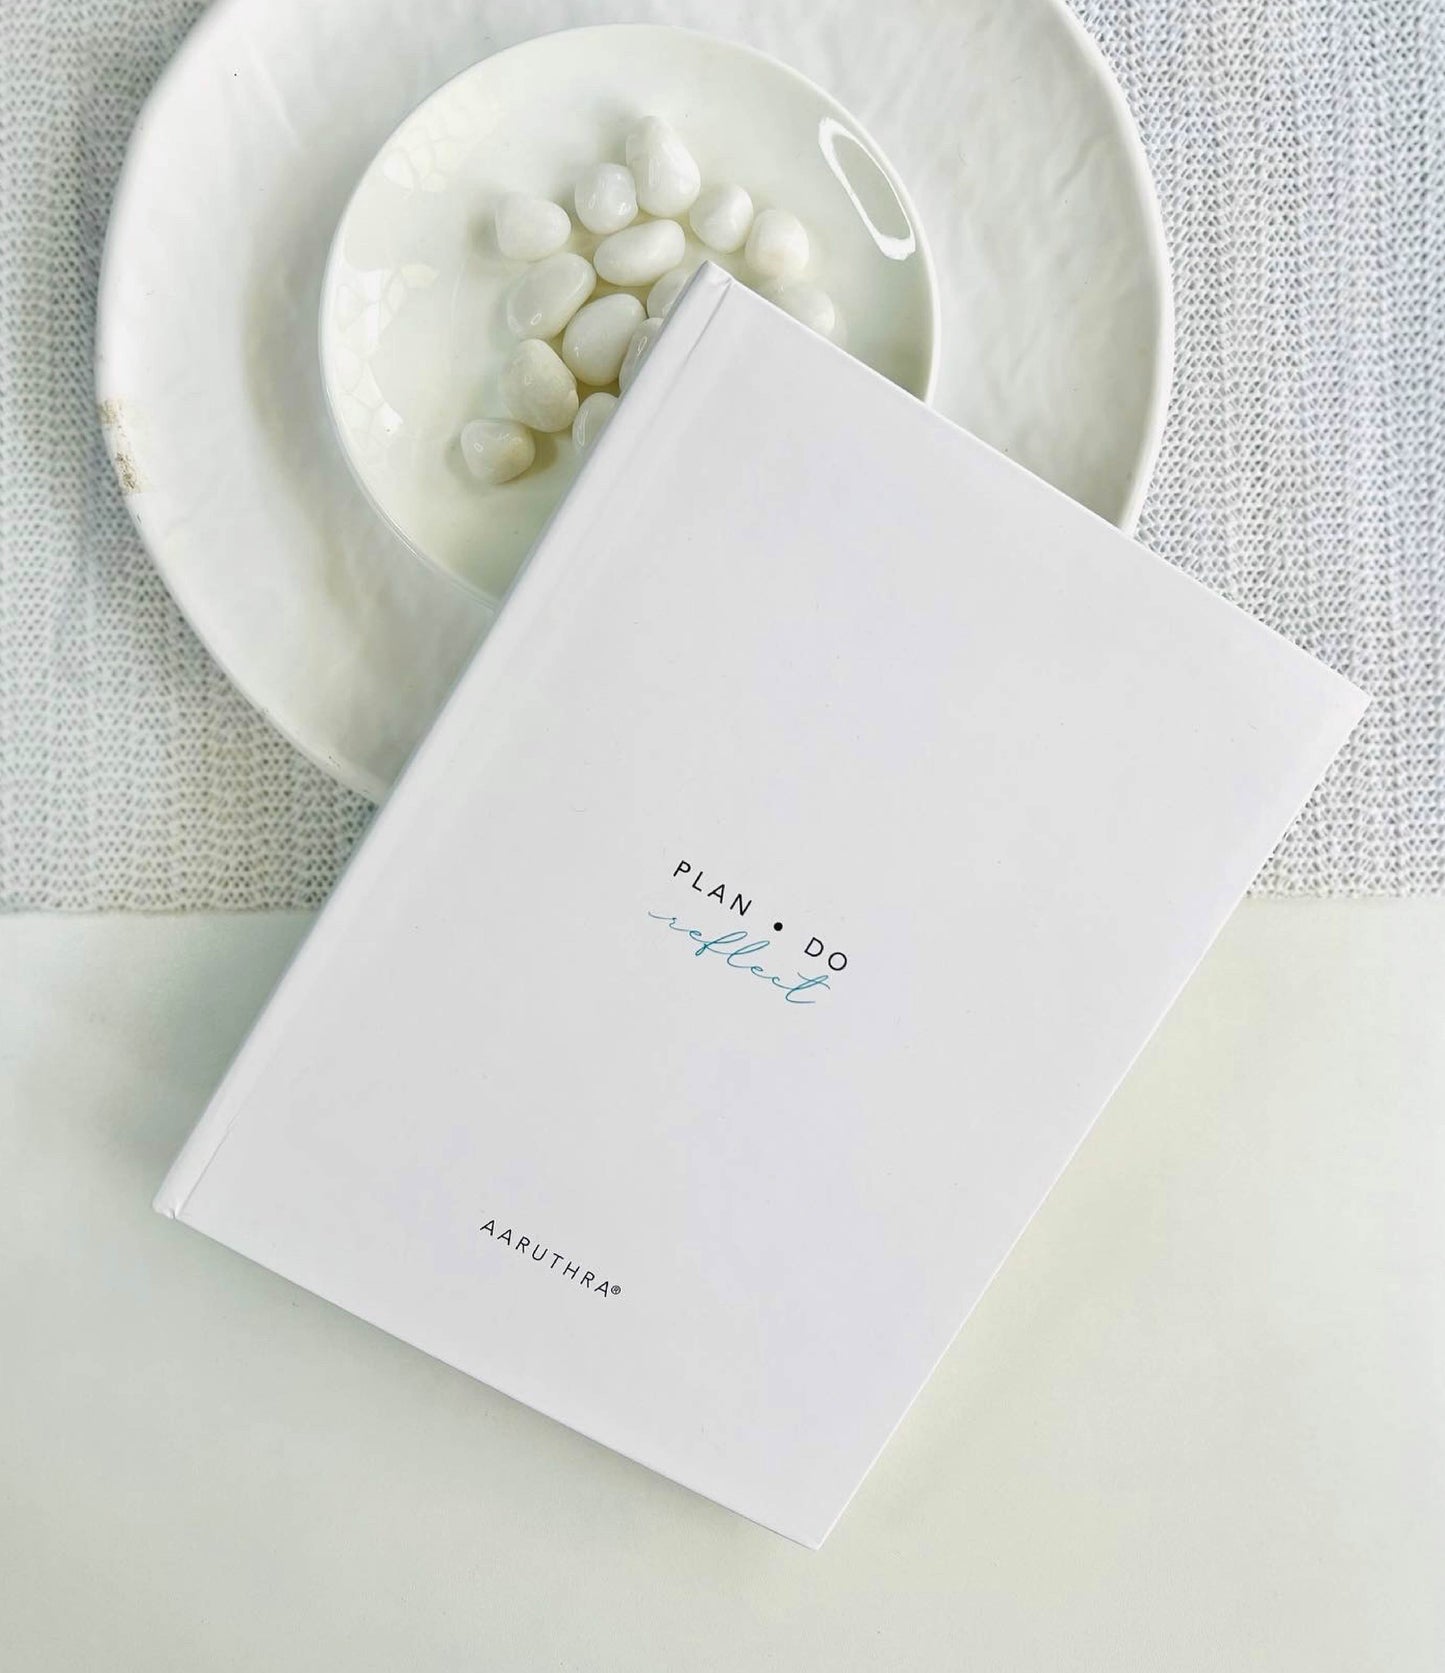 PlanDoReflect: Undated Yearly Planner + Guided Journal | Classic White